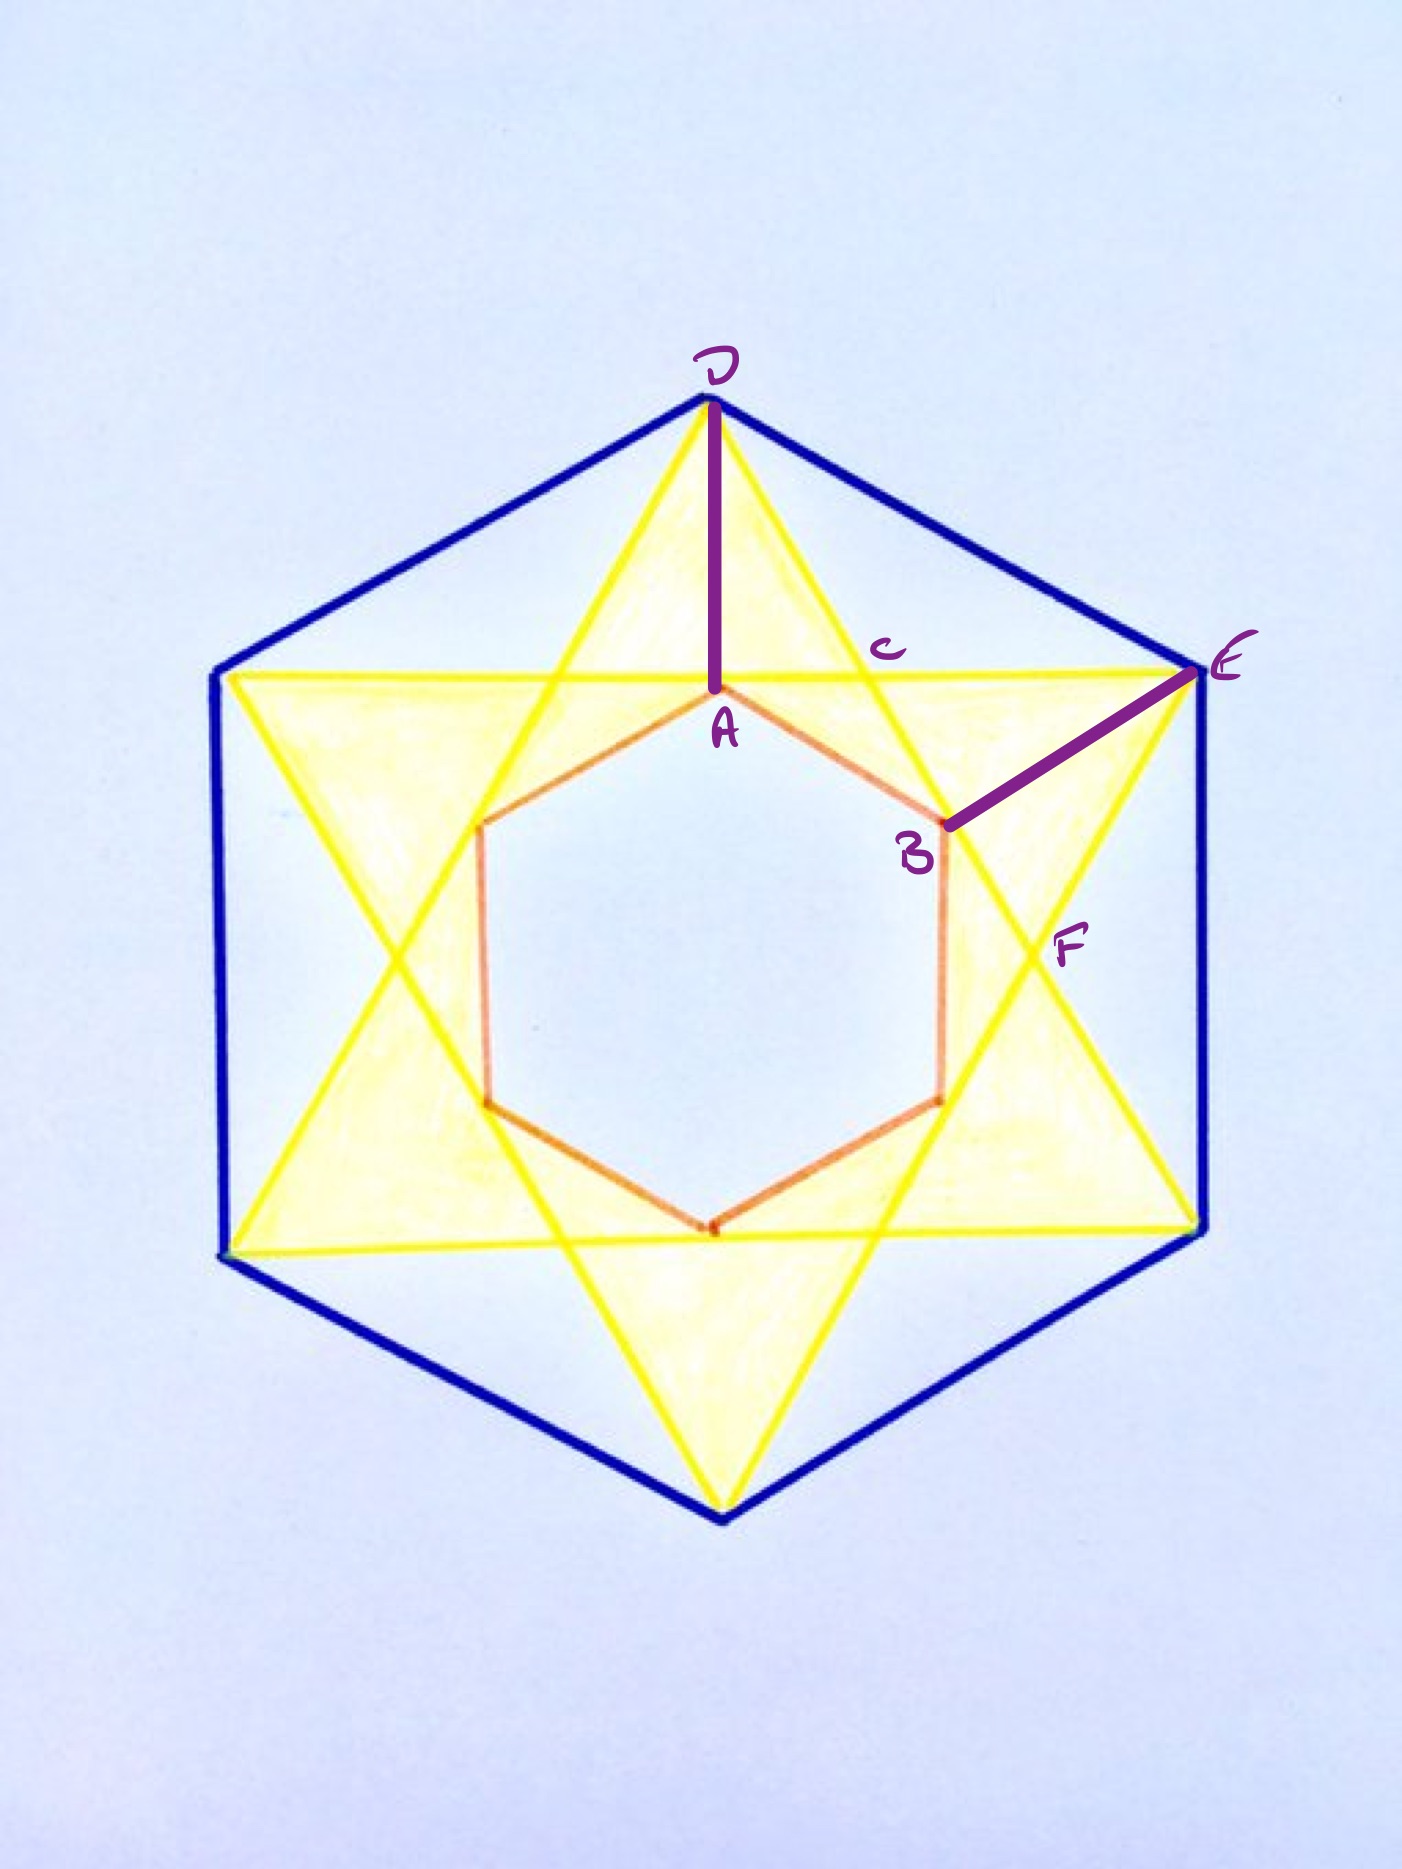 Hexagon in a star in a hexagon labelled